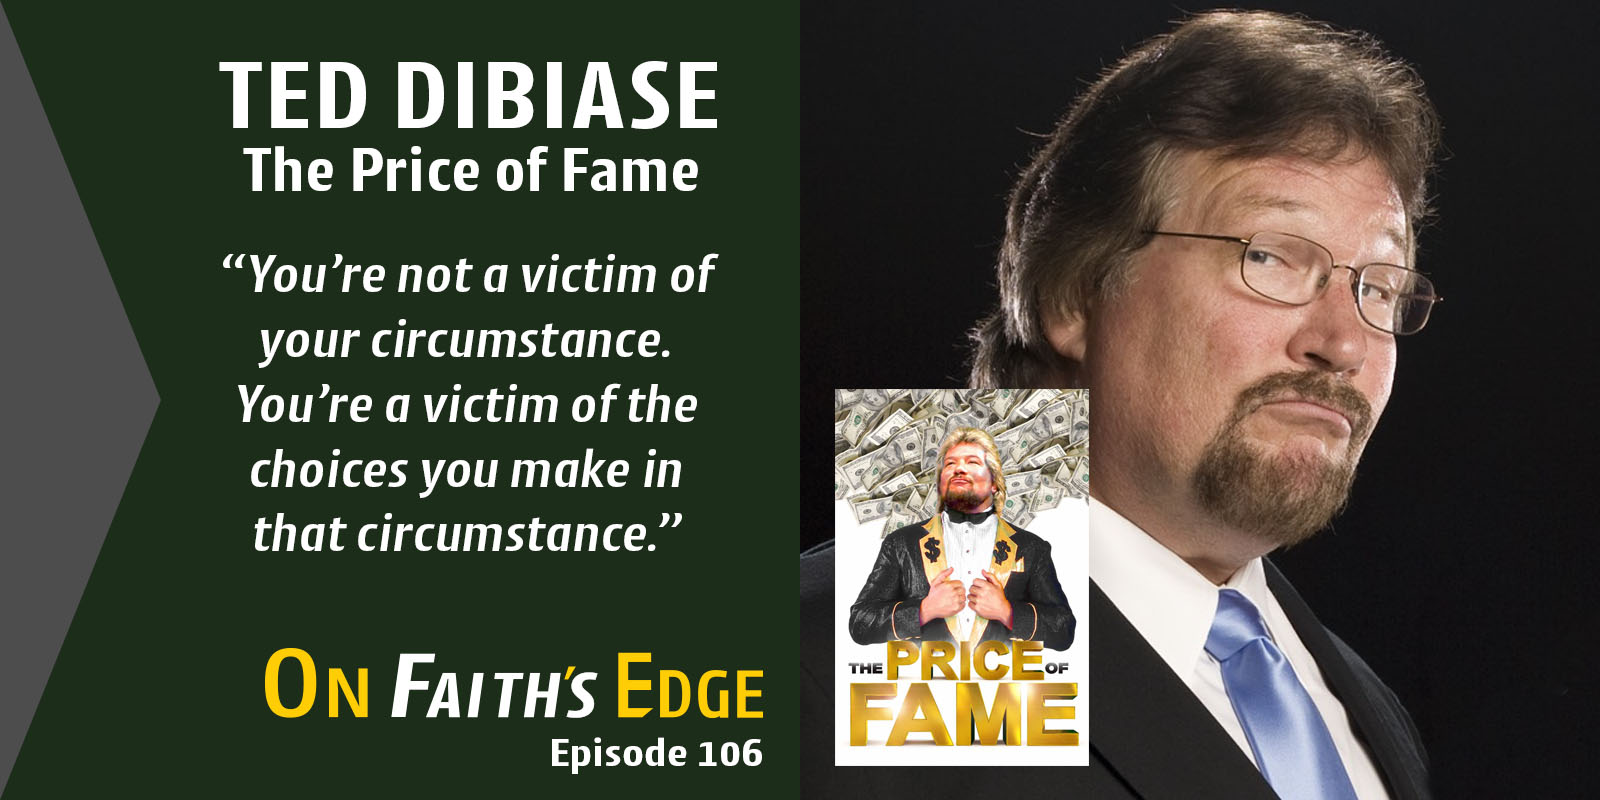 The Price of Fame with Million Dollar Man Ted DiBiase | Episode 106